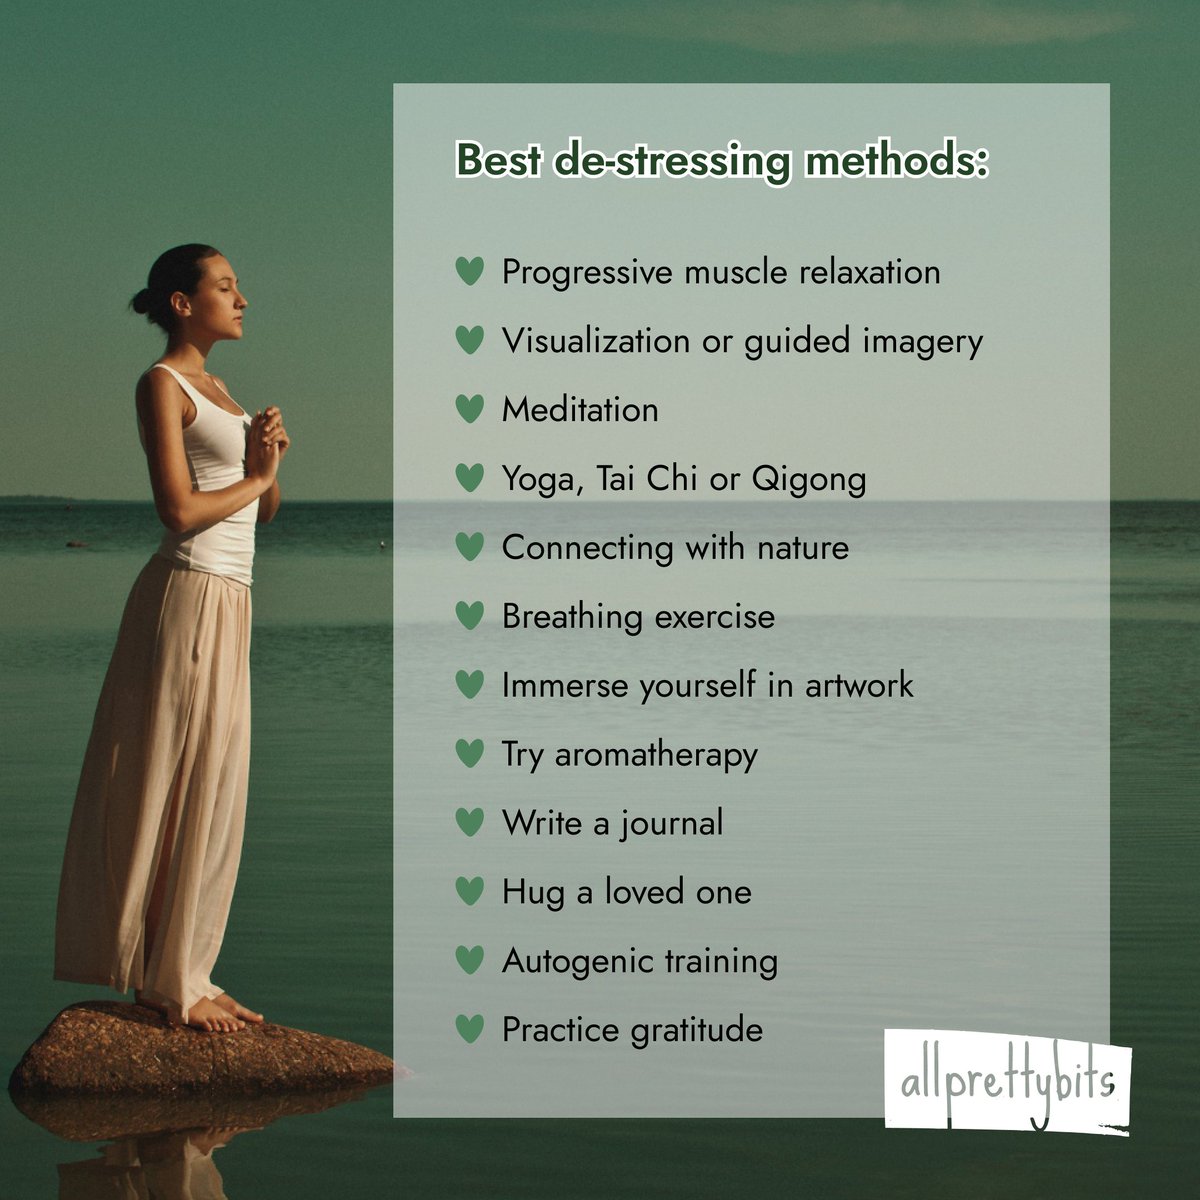 #Stress is an integral part of our modern way of life, and it cannot be avoided. But there are certain techniques that can help us learn how to #relax and #managestress better.
#relaxation #stressrelief #mentalhealth #destressmethods #wellness #relaxationtips